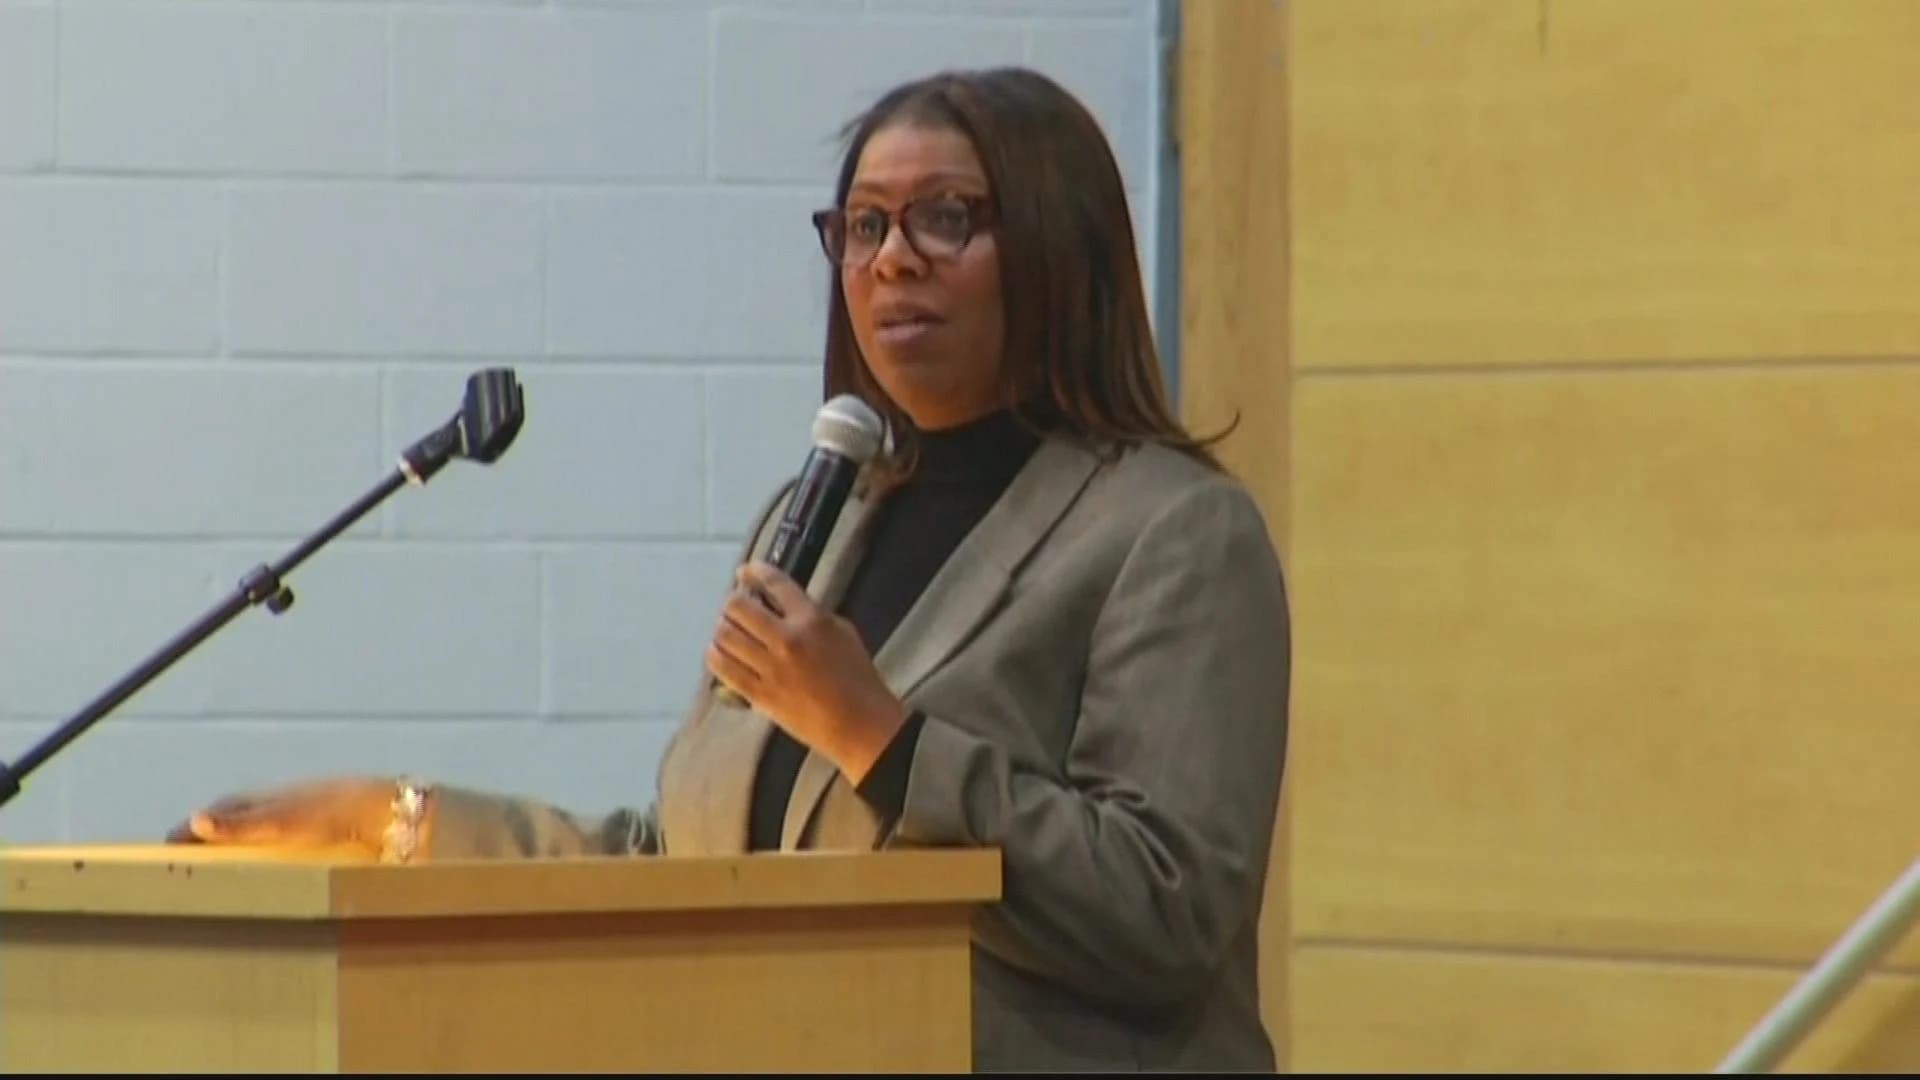 Public advocate hosts town hall meeting in South Bronx